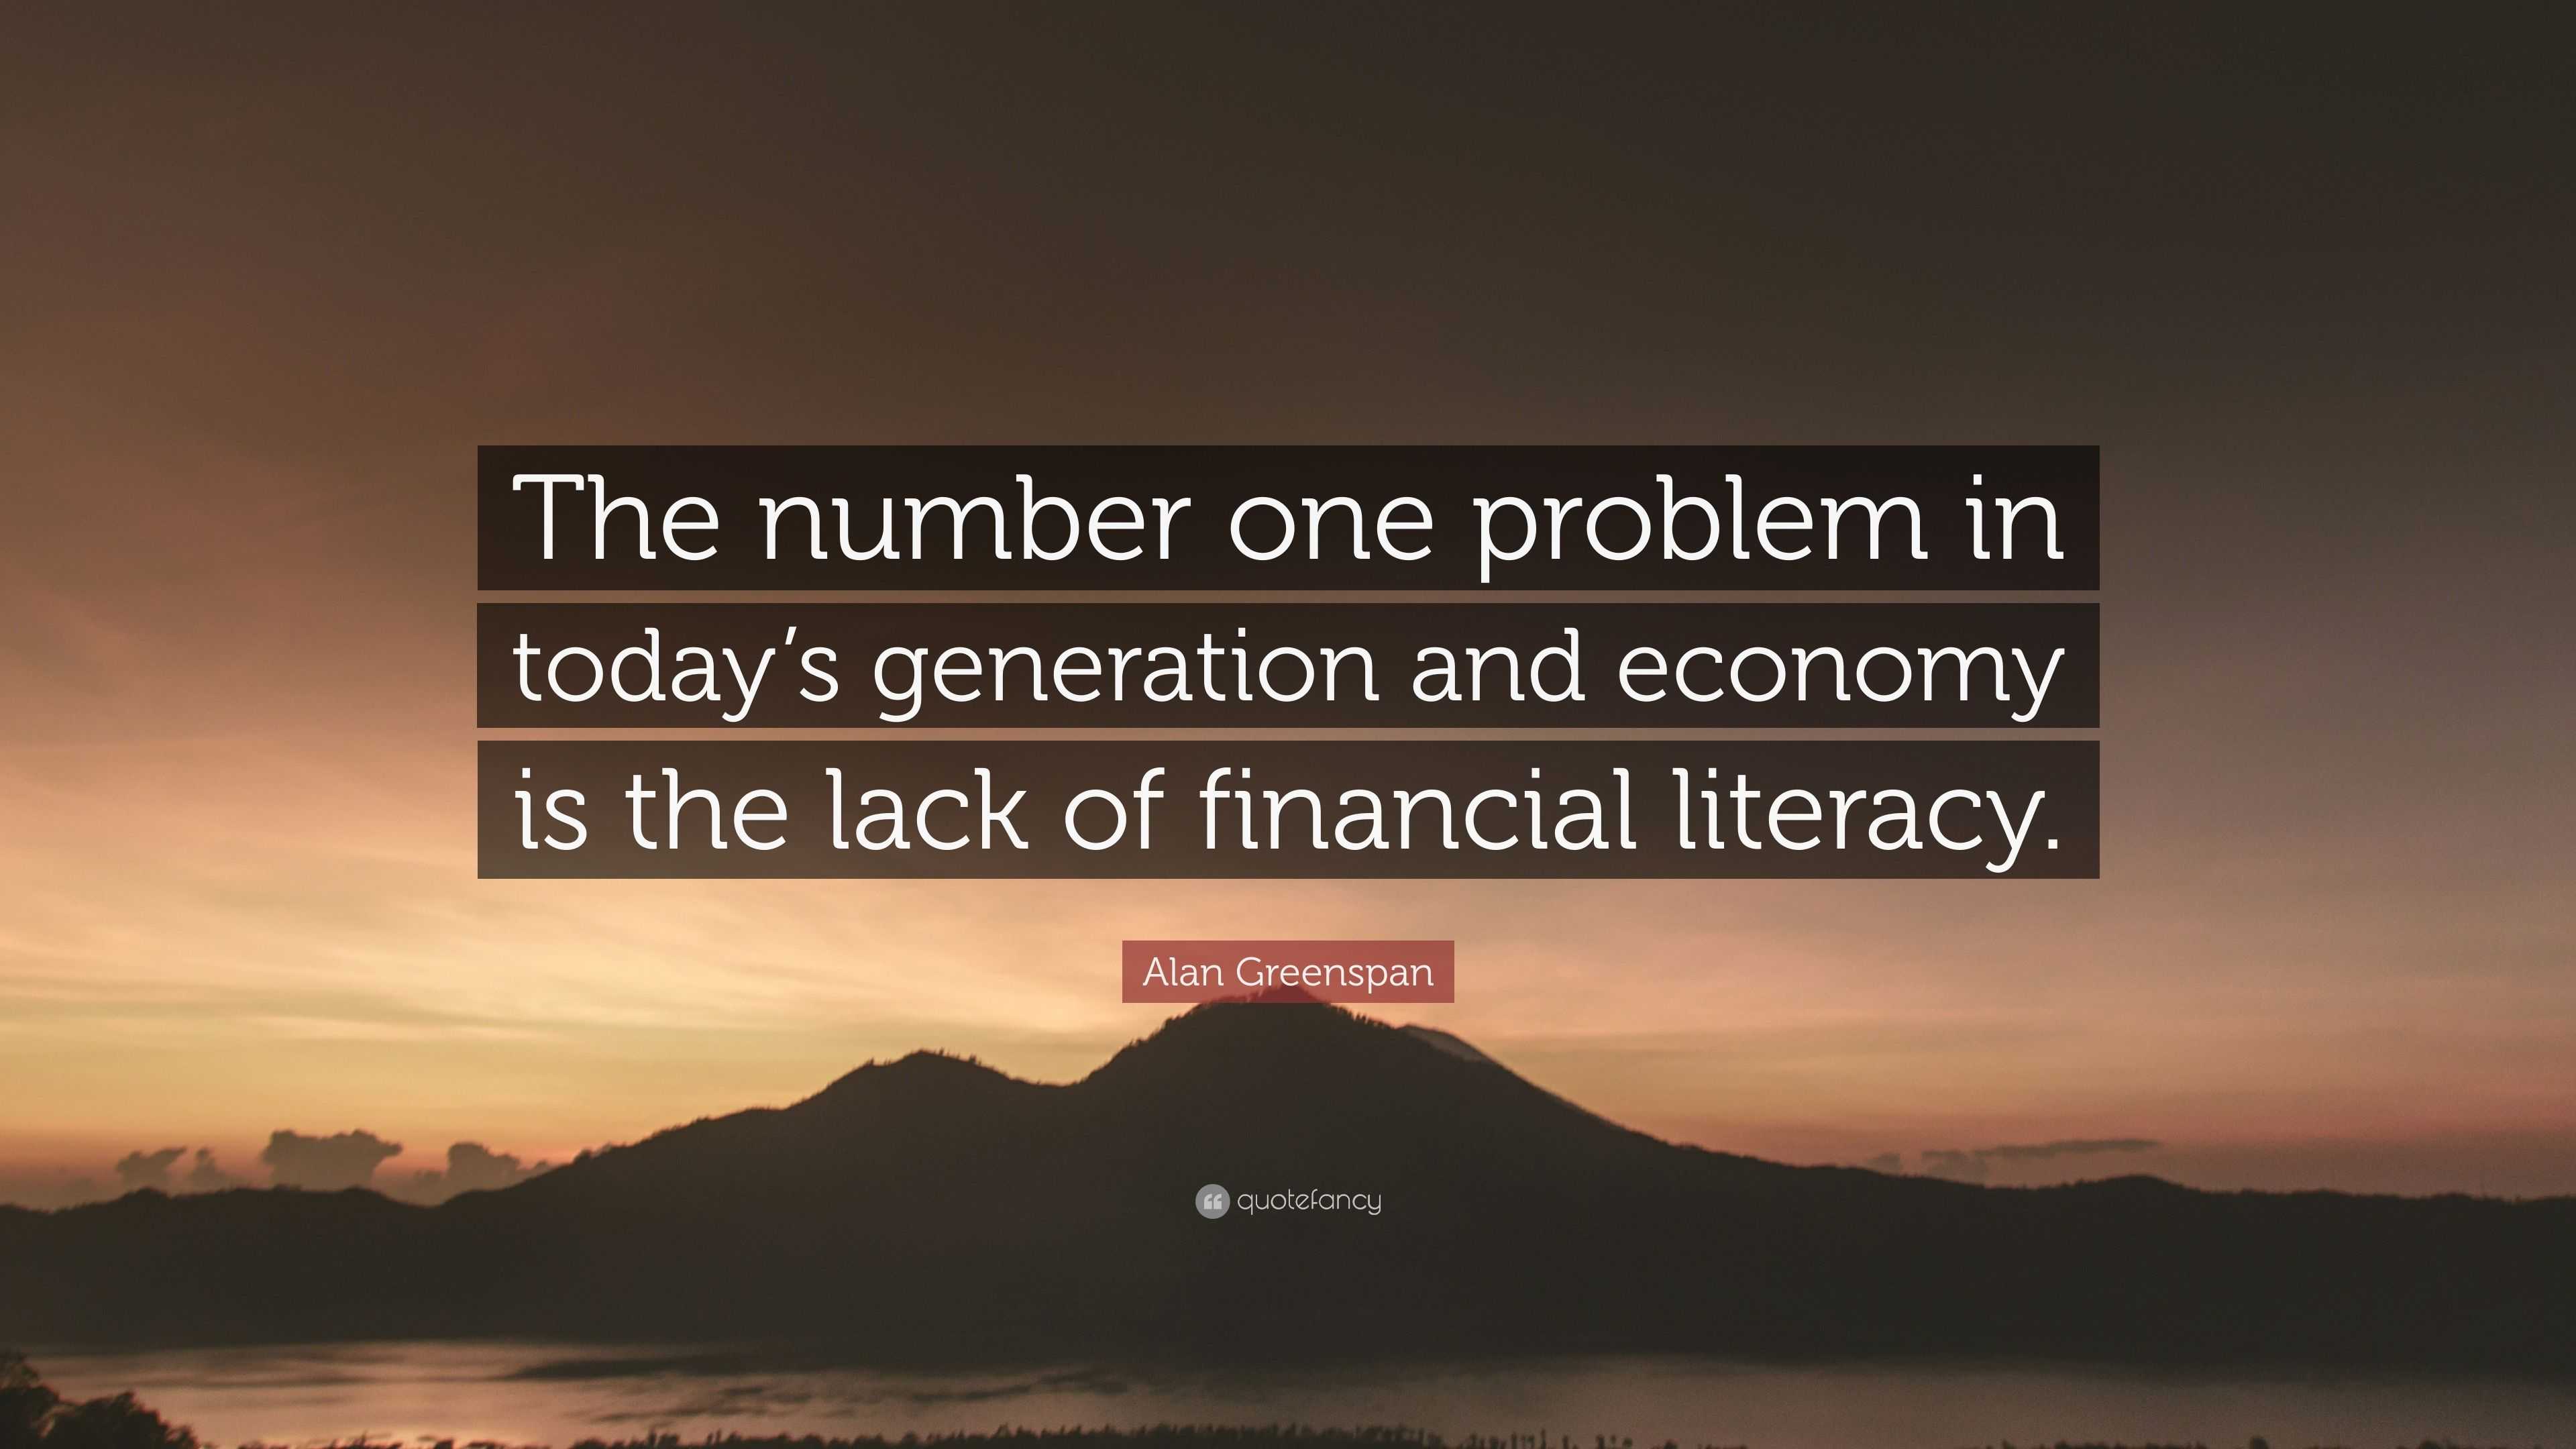 Alan Greenspan Quote: “The number one problem in today’s generation and